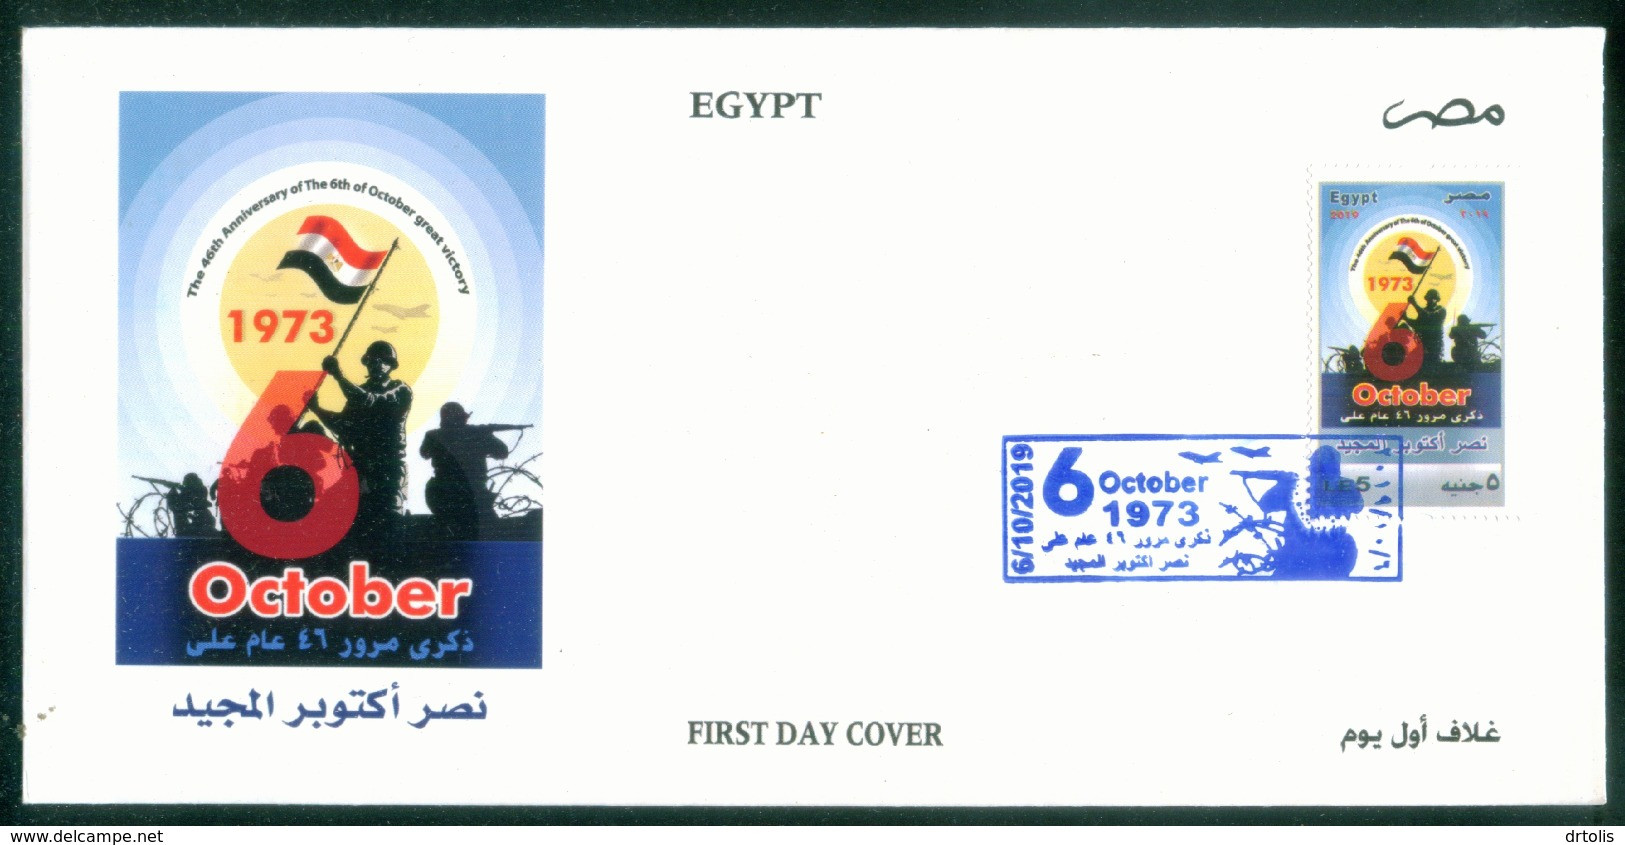 EGYPT / ISRAEL / 2019 / 6TH OCTOBER WAR / YOM KIPPUR / FLAG / SOLDIERS / GUNS / BARBED WIRE / FDC - Lettres & Documents